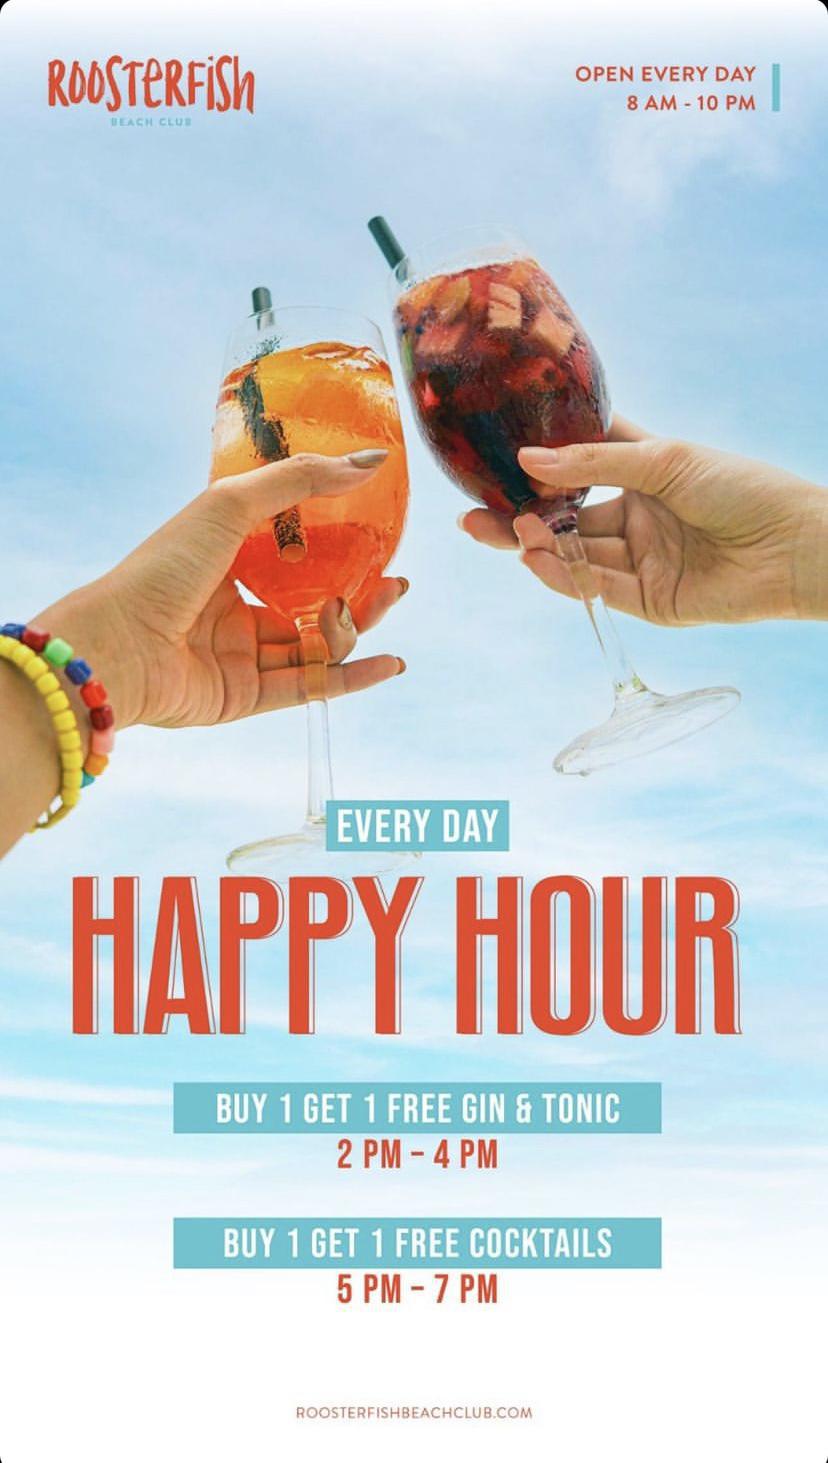 Happy Hour at RoosterFish Beach Club - 2pm to 7pm